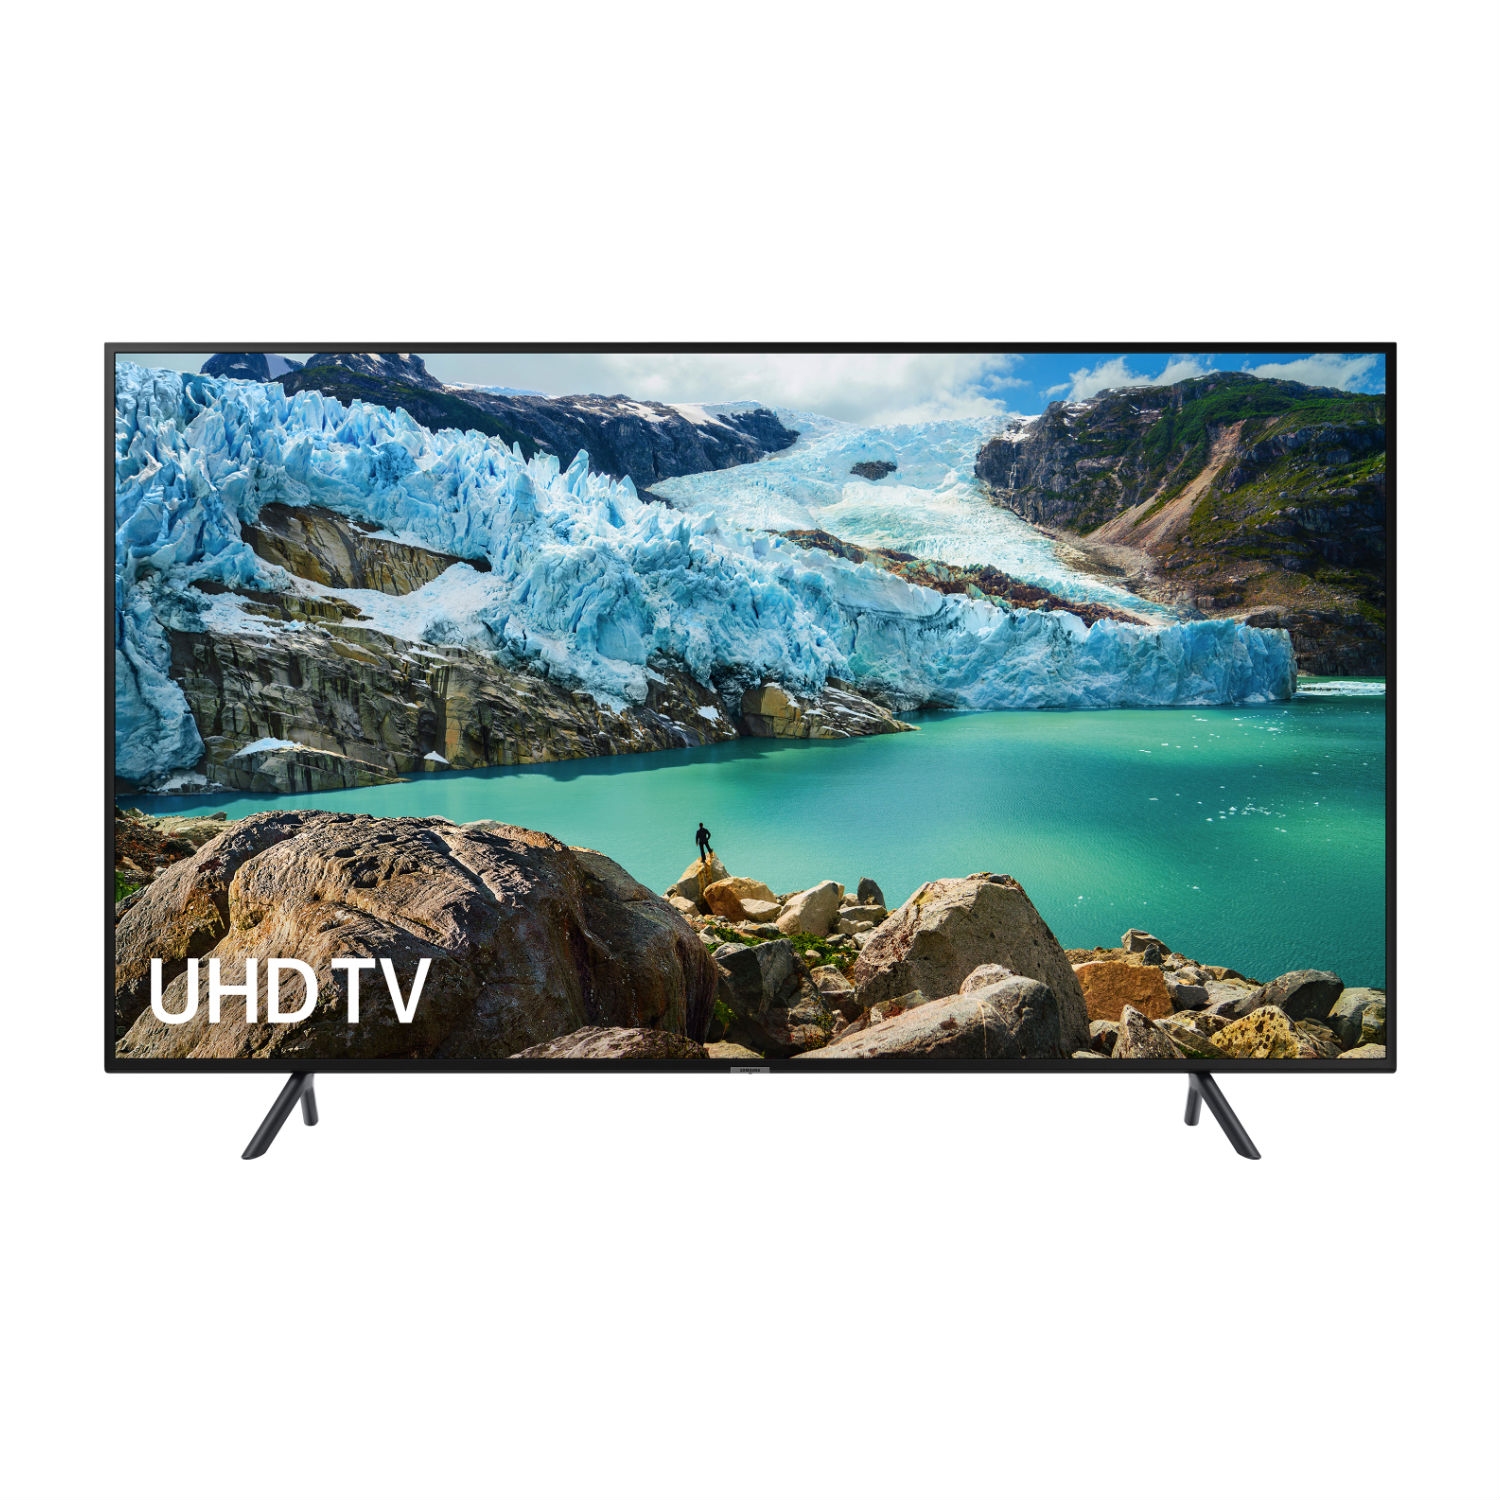 Samsung 43" 4K UHD - SMART TV - Freeview - A Rated - 0